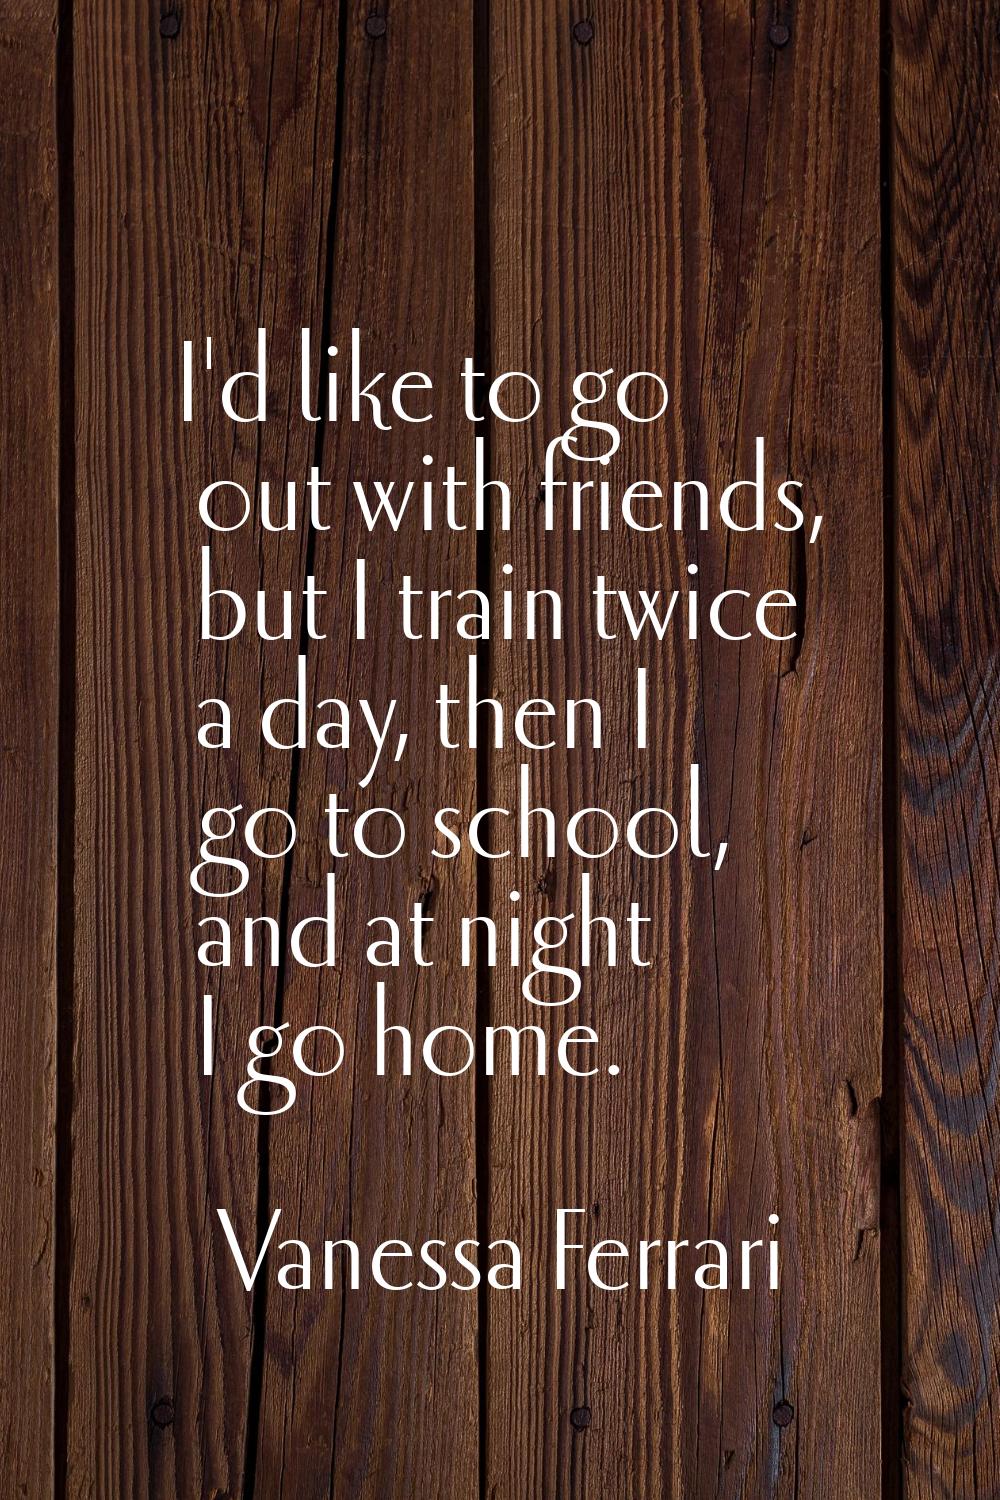 I'd like to go out with friends, but I train twice a day, then I go to school, and at night I go ho